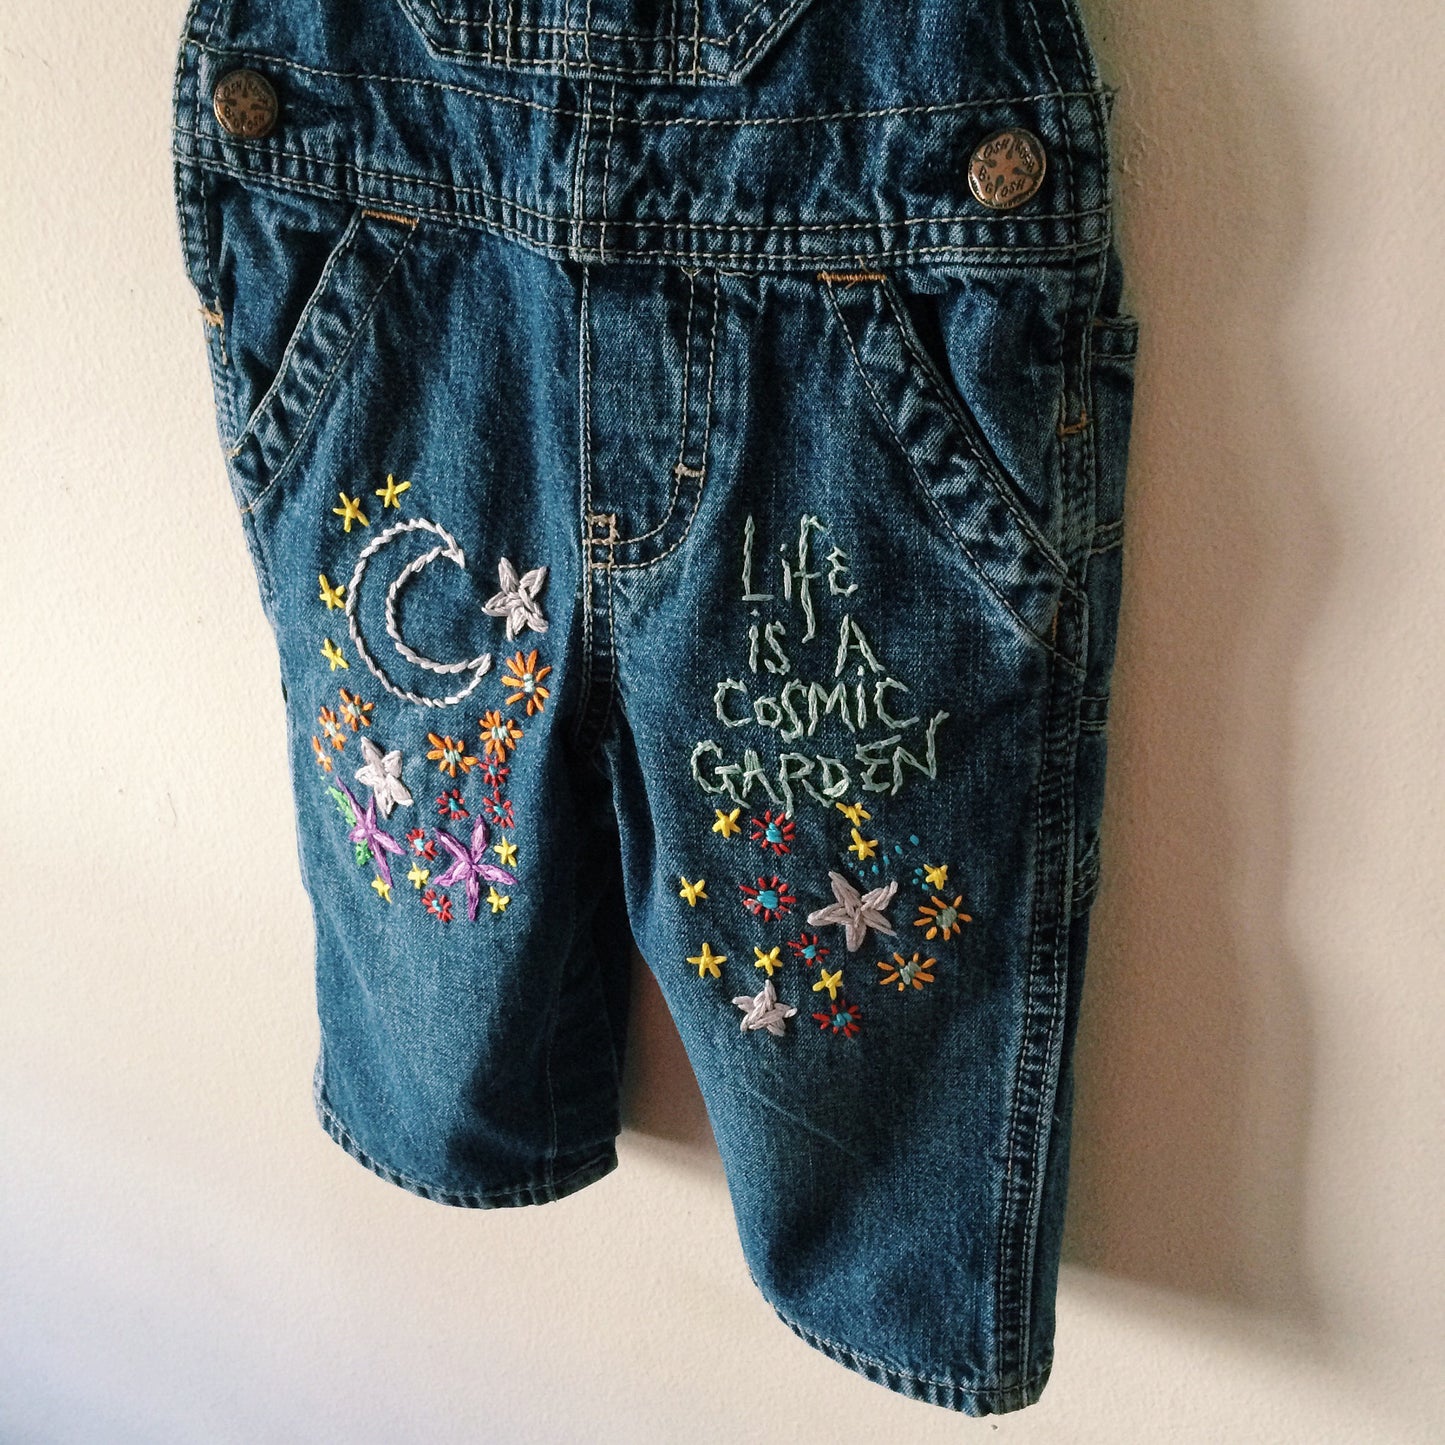 Cosmic Garden Baby Size Embroidered Denim Overalls. One of a kind. Free Shipping